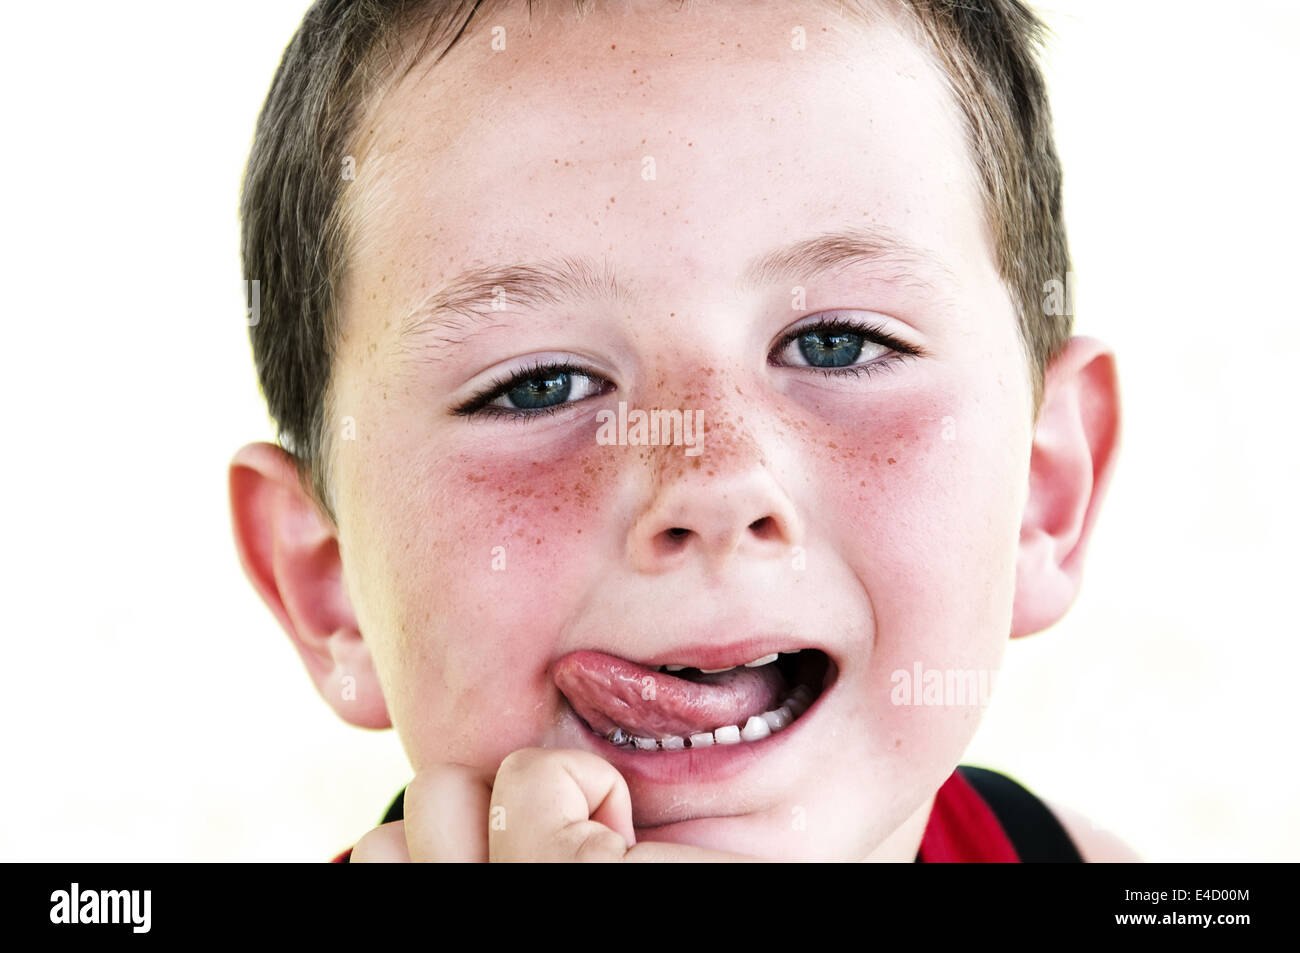 Cute little boy being playful and making funny faces Stock Photo